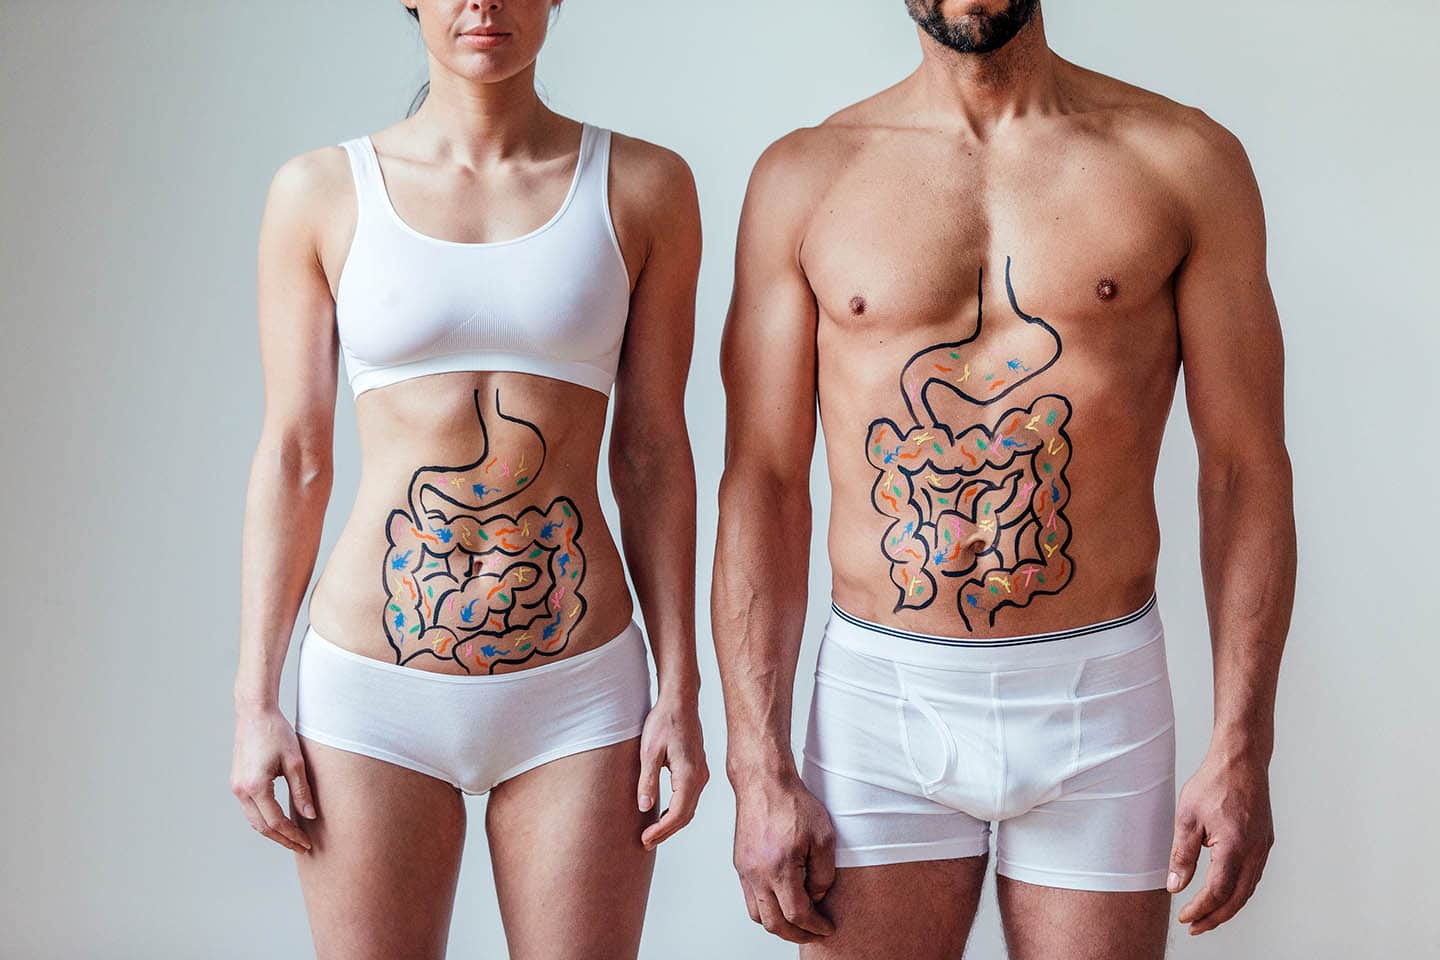 A healthy man and woman in their underwear, with illustrations of their gastrointestinal tract drawn on their stomachs